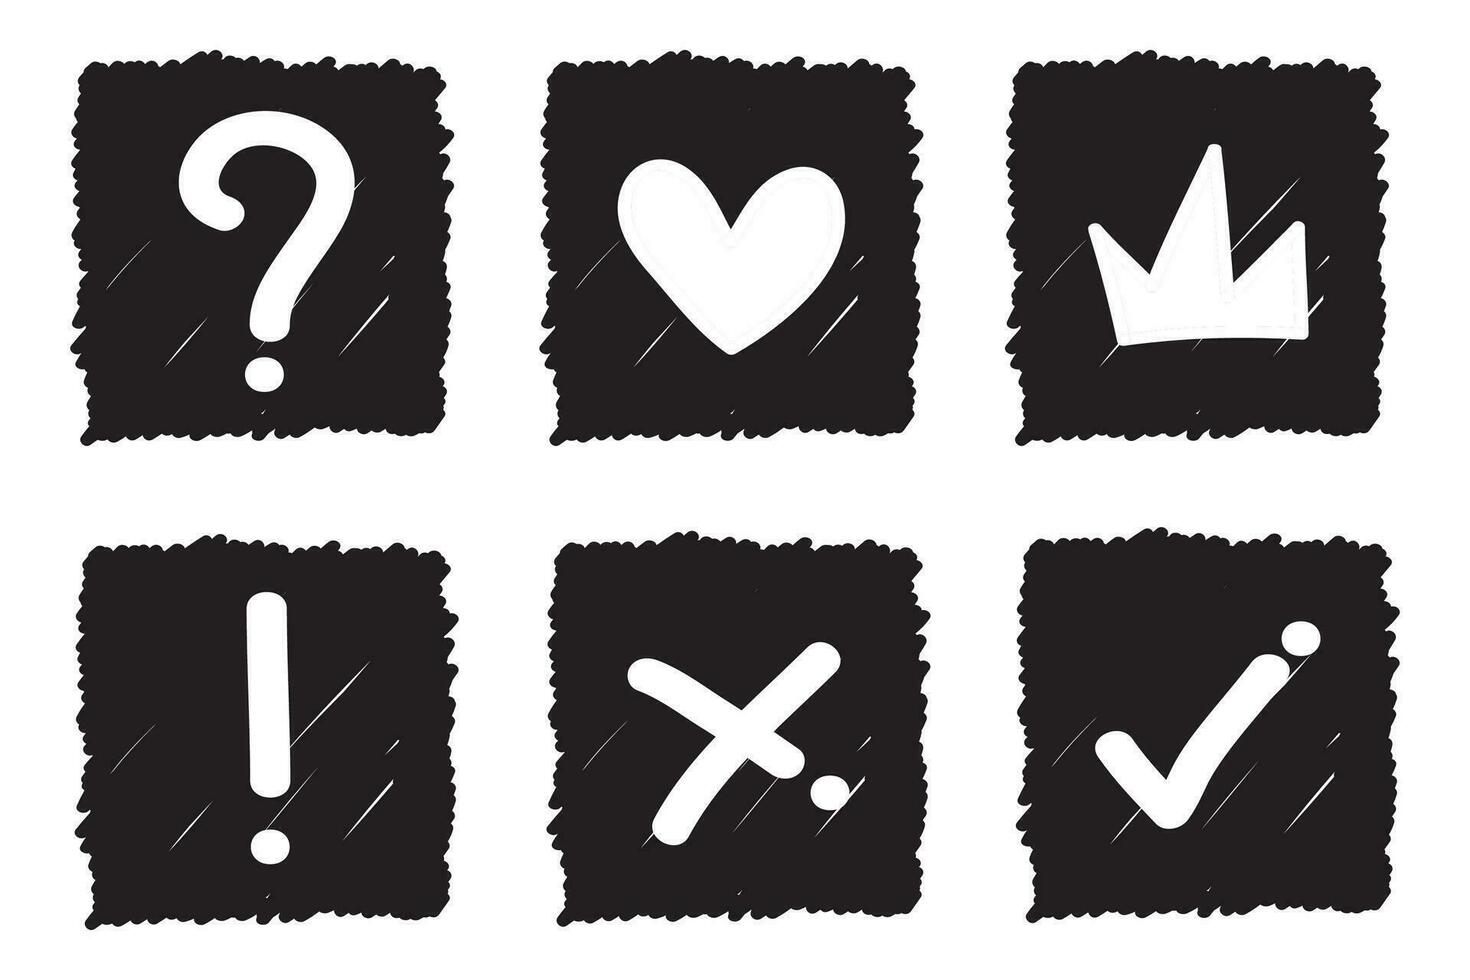 doodle sketch pen and scribbled elements of heart, crown, question mark, agree mark,isolated on white background .vector illustration vector